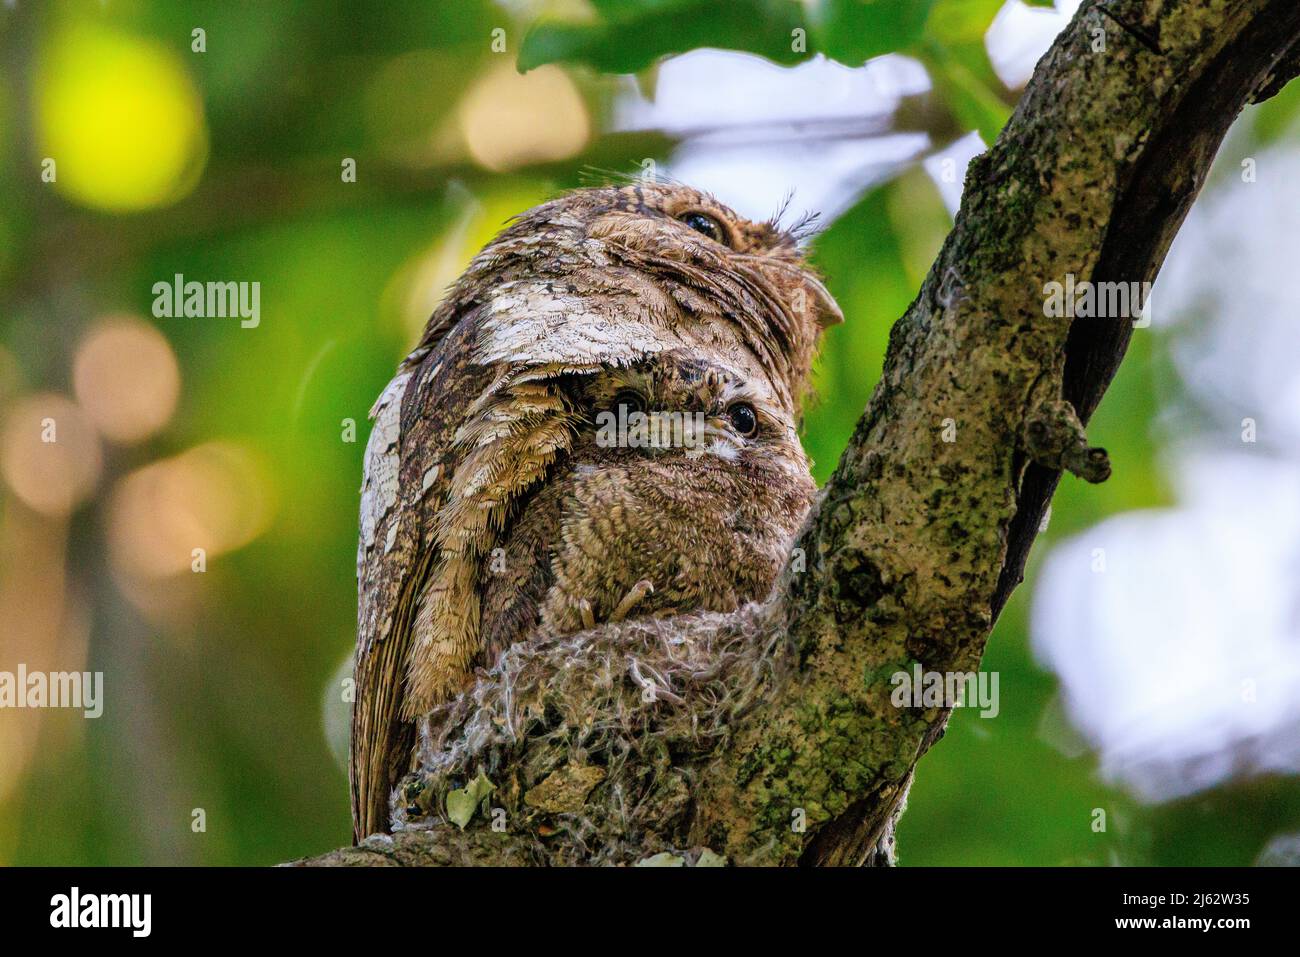 Adult male sri lanka frogmouth sitting on nest with chick Stock Photo